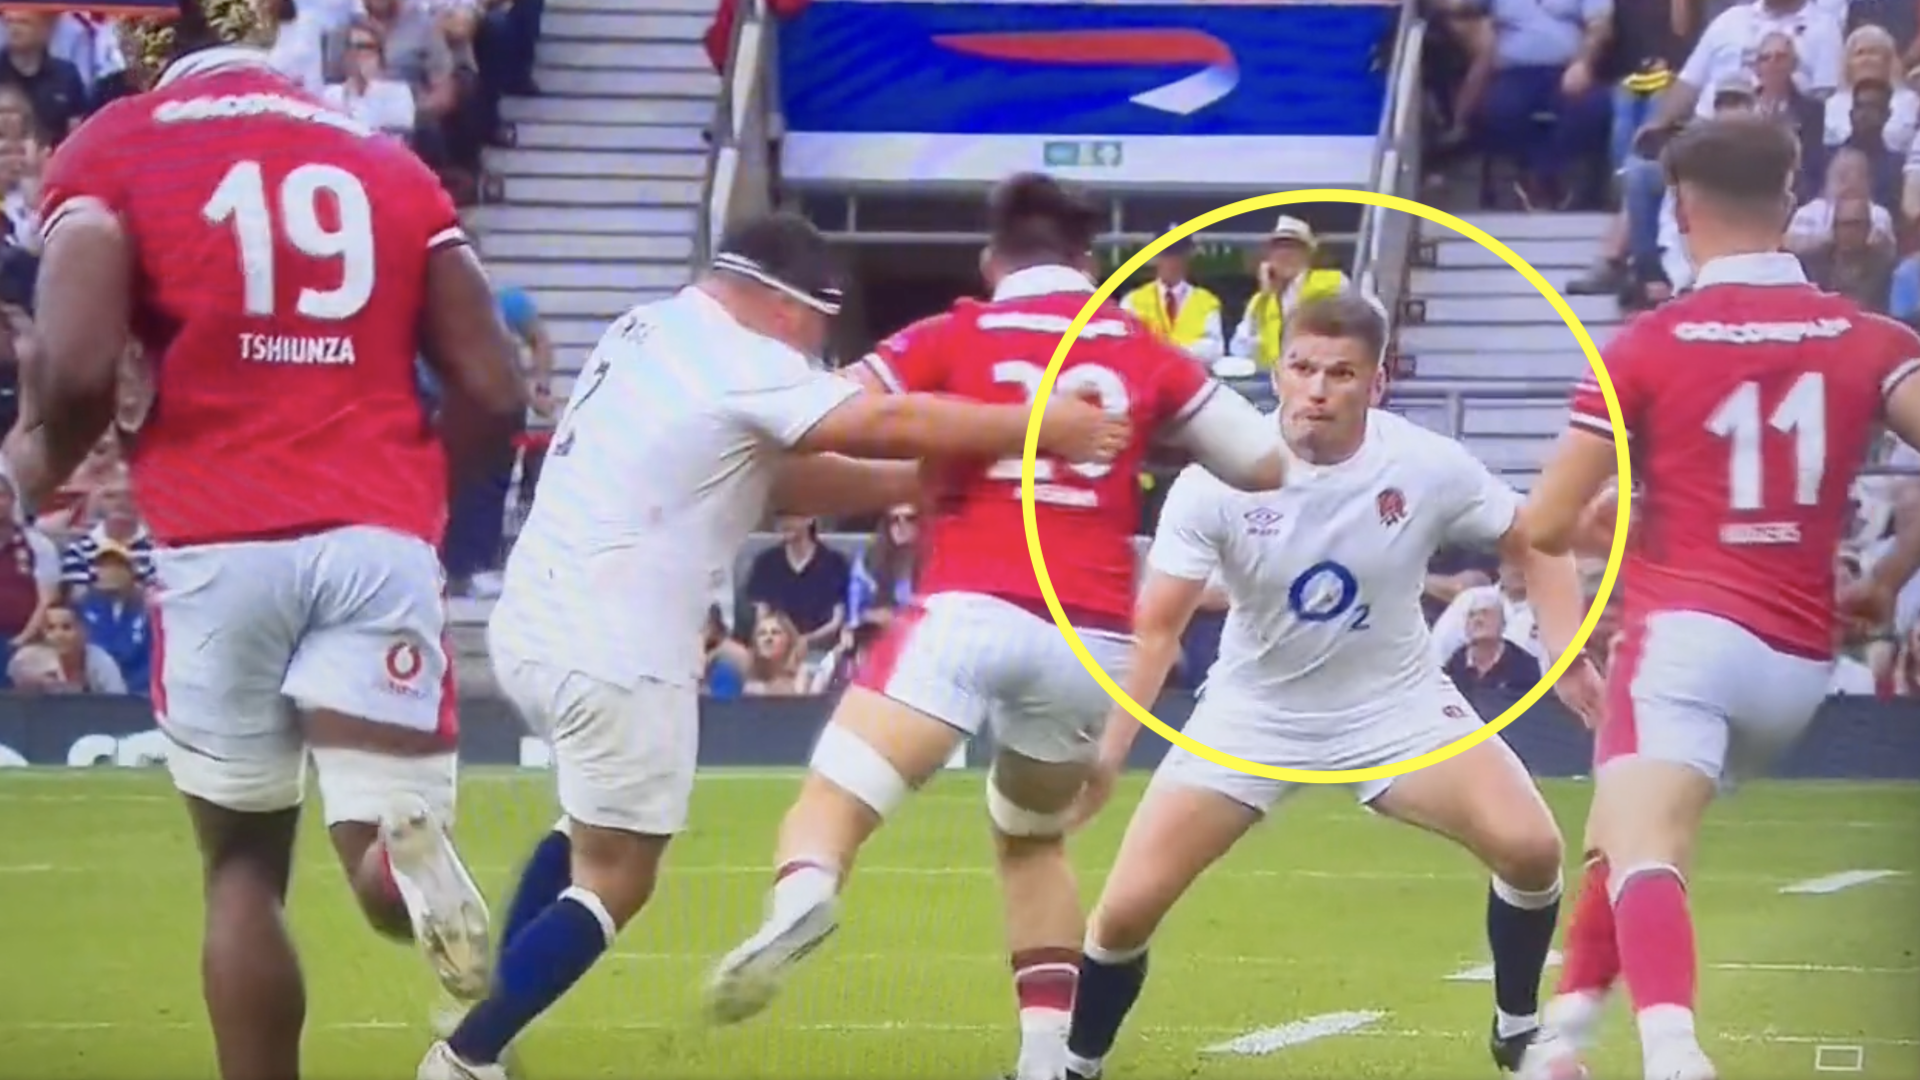 Owen Farrell handed World Cup lifeline as new angle reveals his innocence